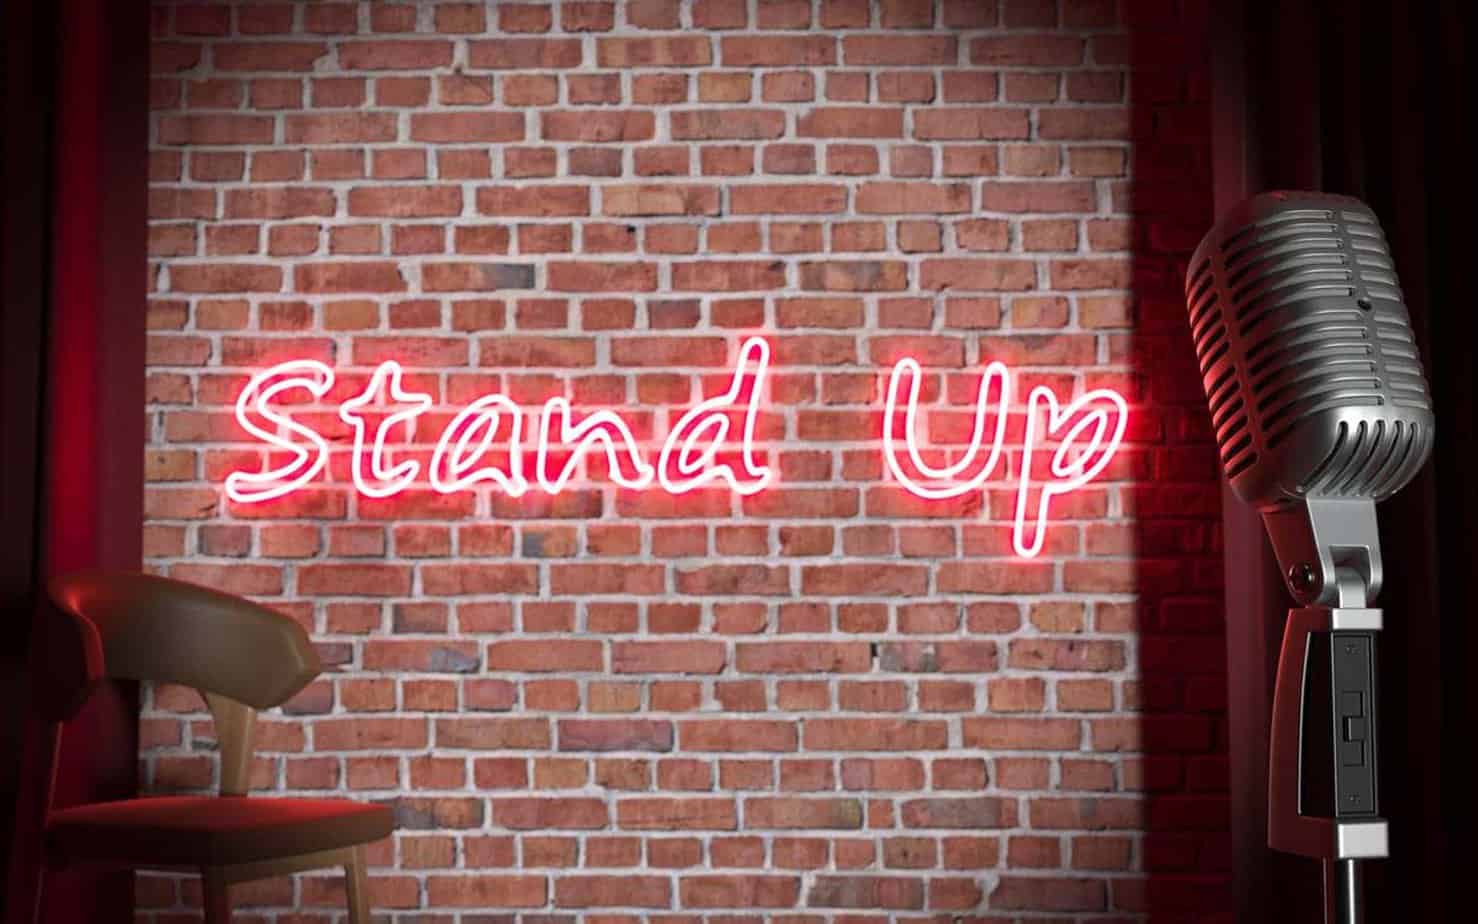 10 BEST STAND UP COMICS - These shows will help get you through the next two weeks